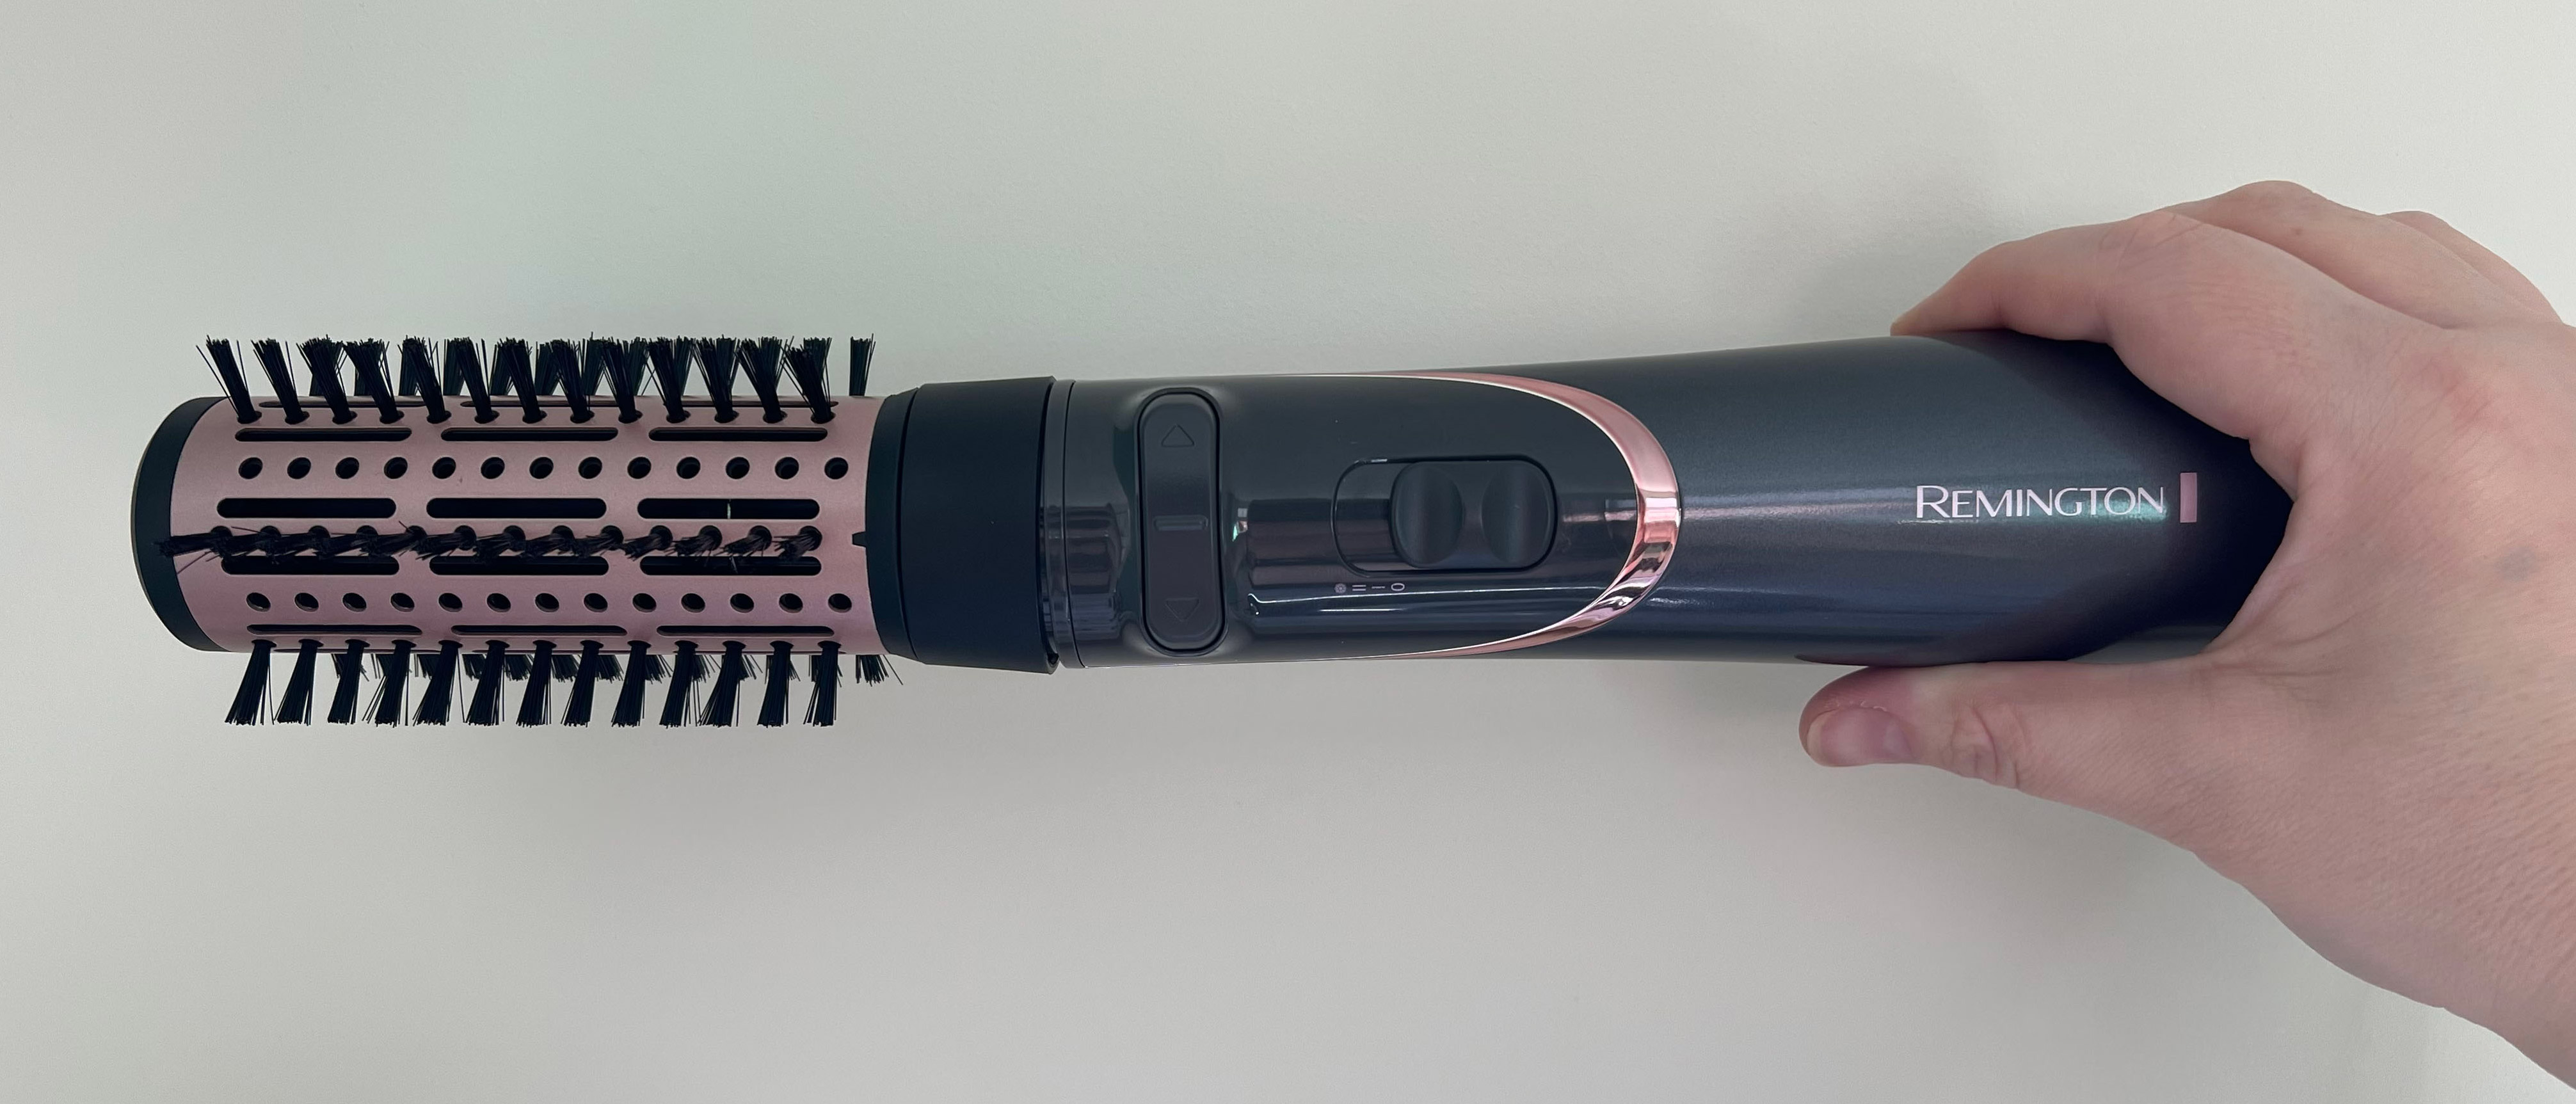 Straight | TechRadar review Airstyler and Curl AS8606 Confidence Remington